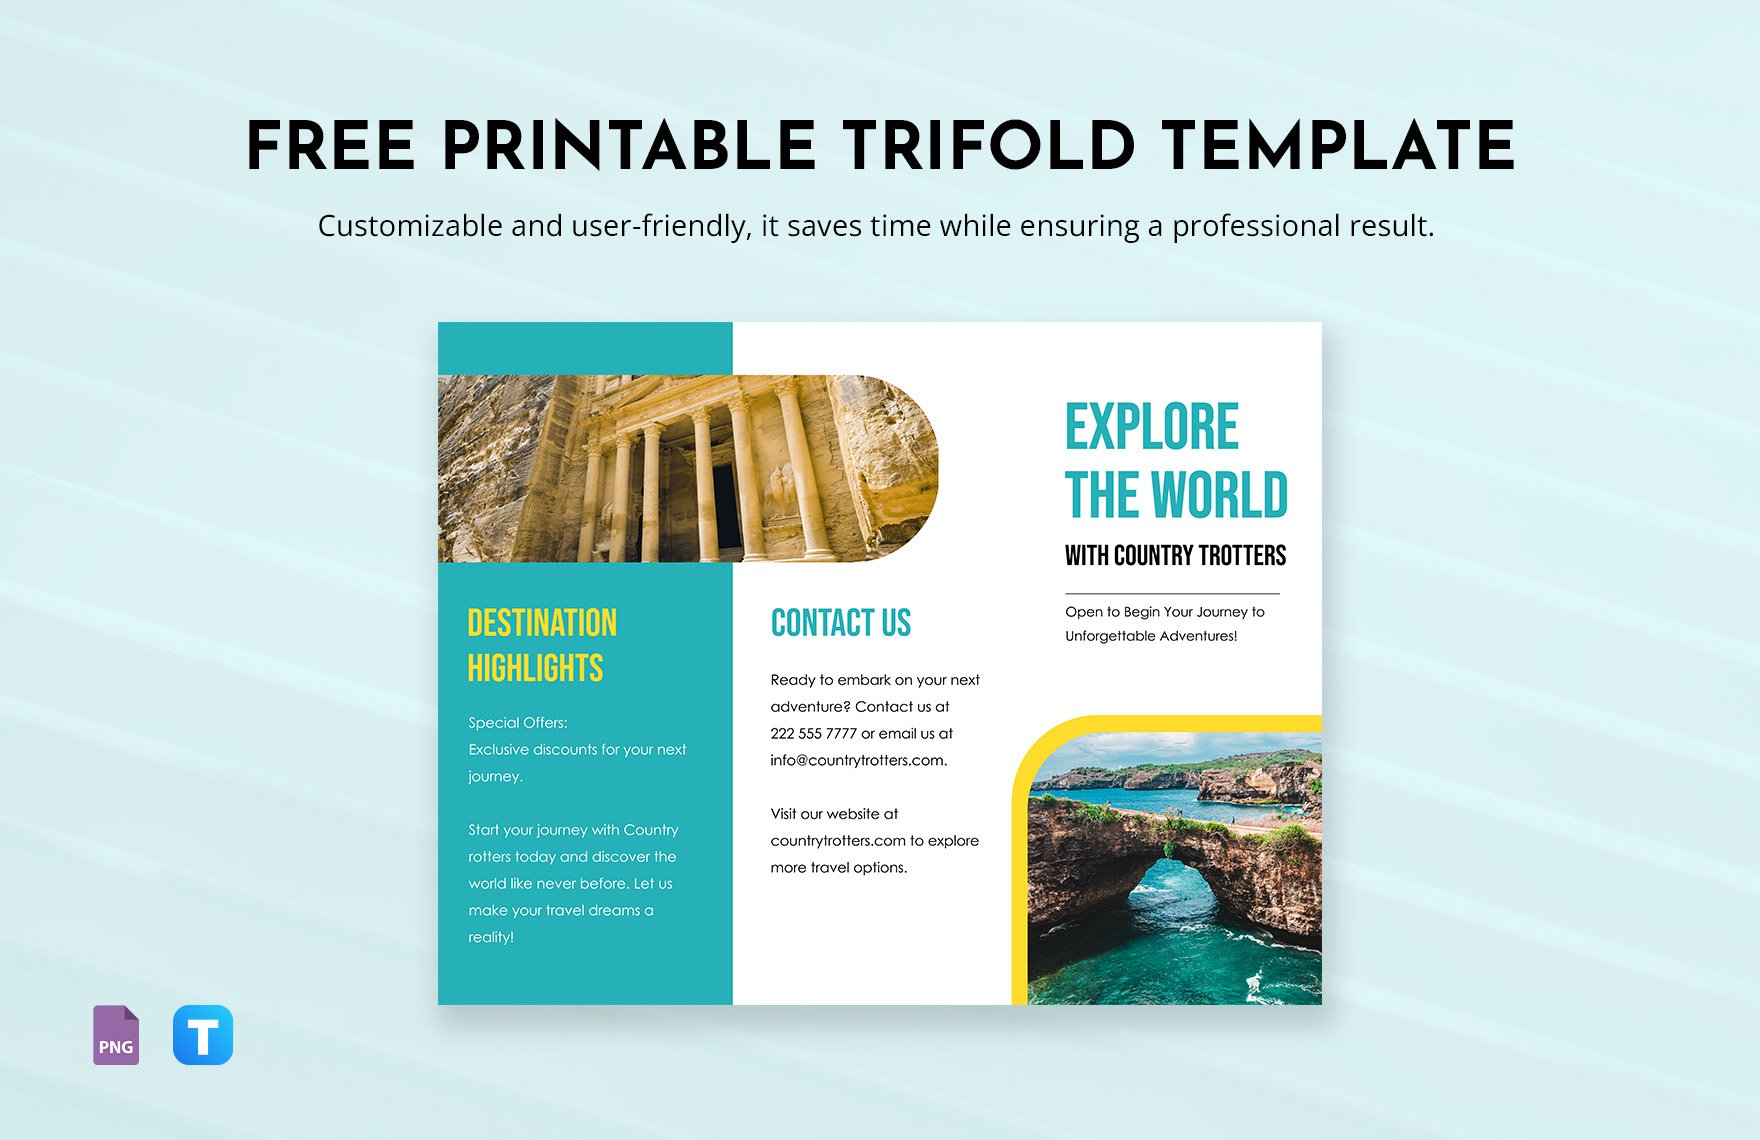 Free Printable Trifold Template